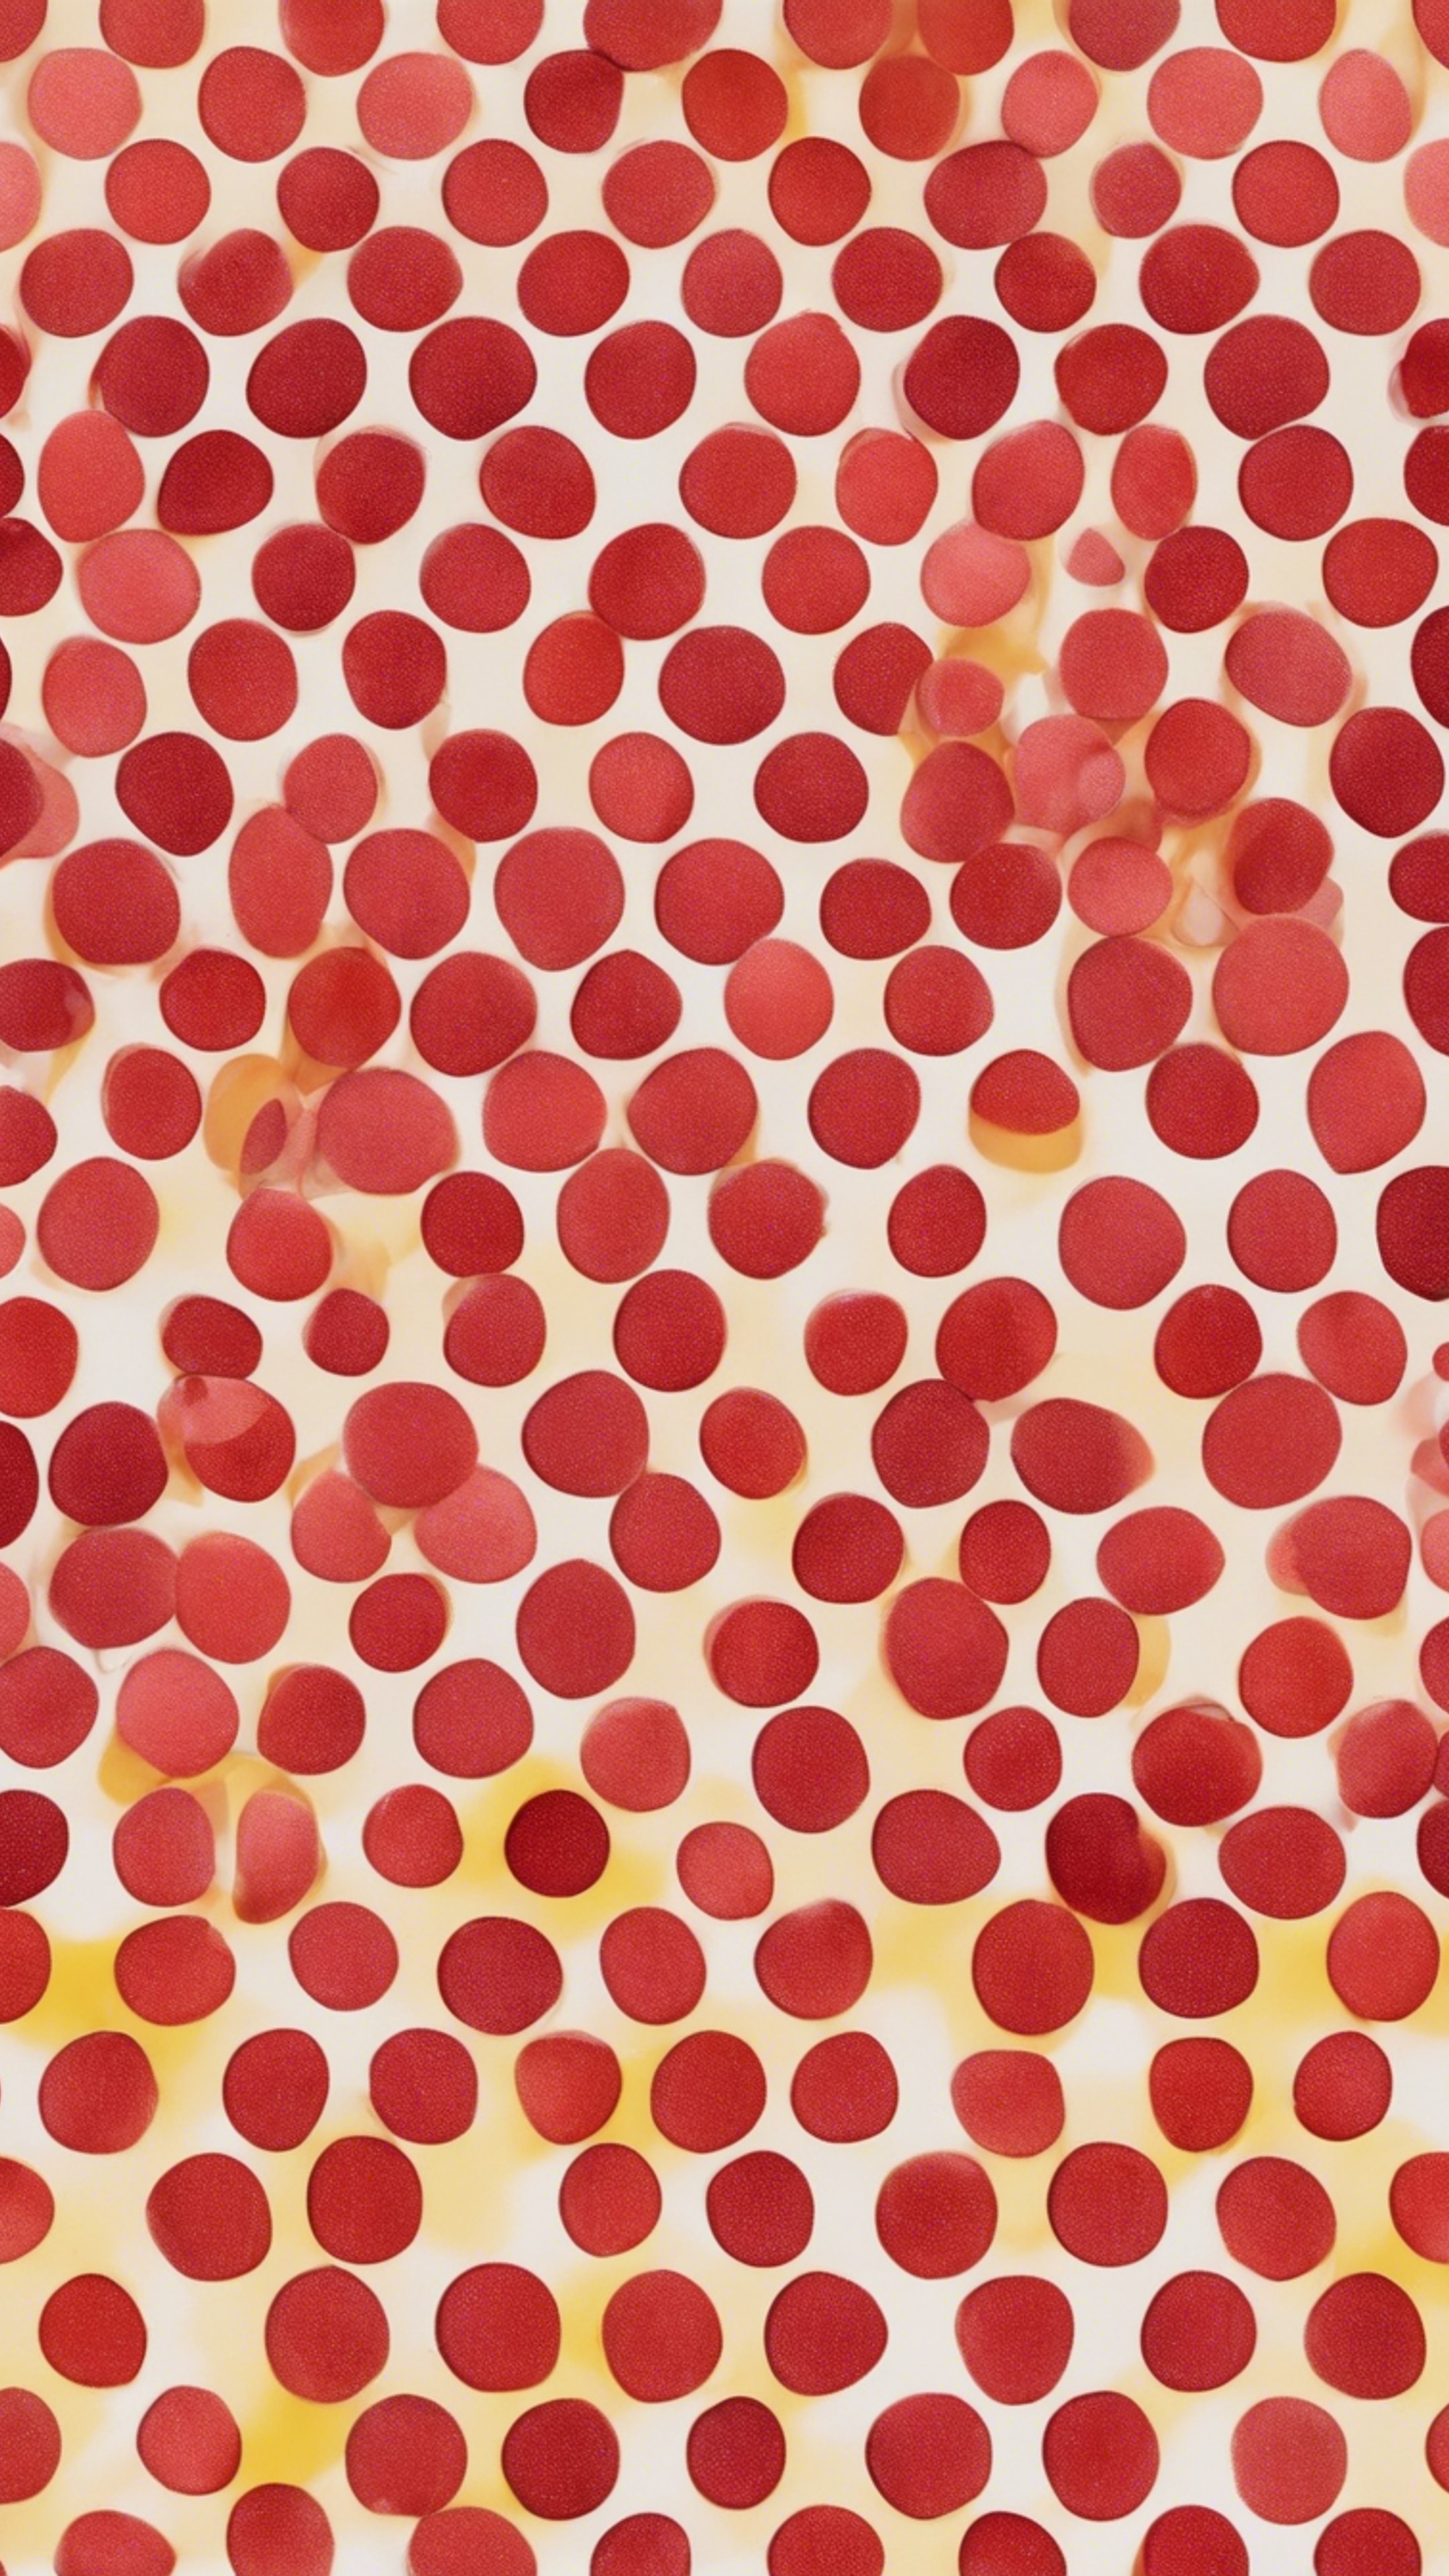 Red polka dots clashing beautifully with yellow ones, all over the seamless canvas. Tapet[6845ea3f5aaf42daa07d]